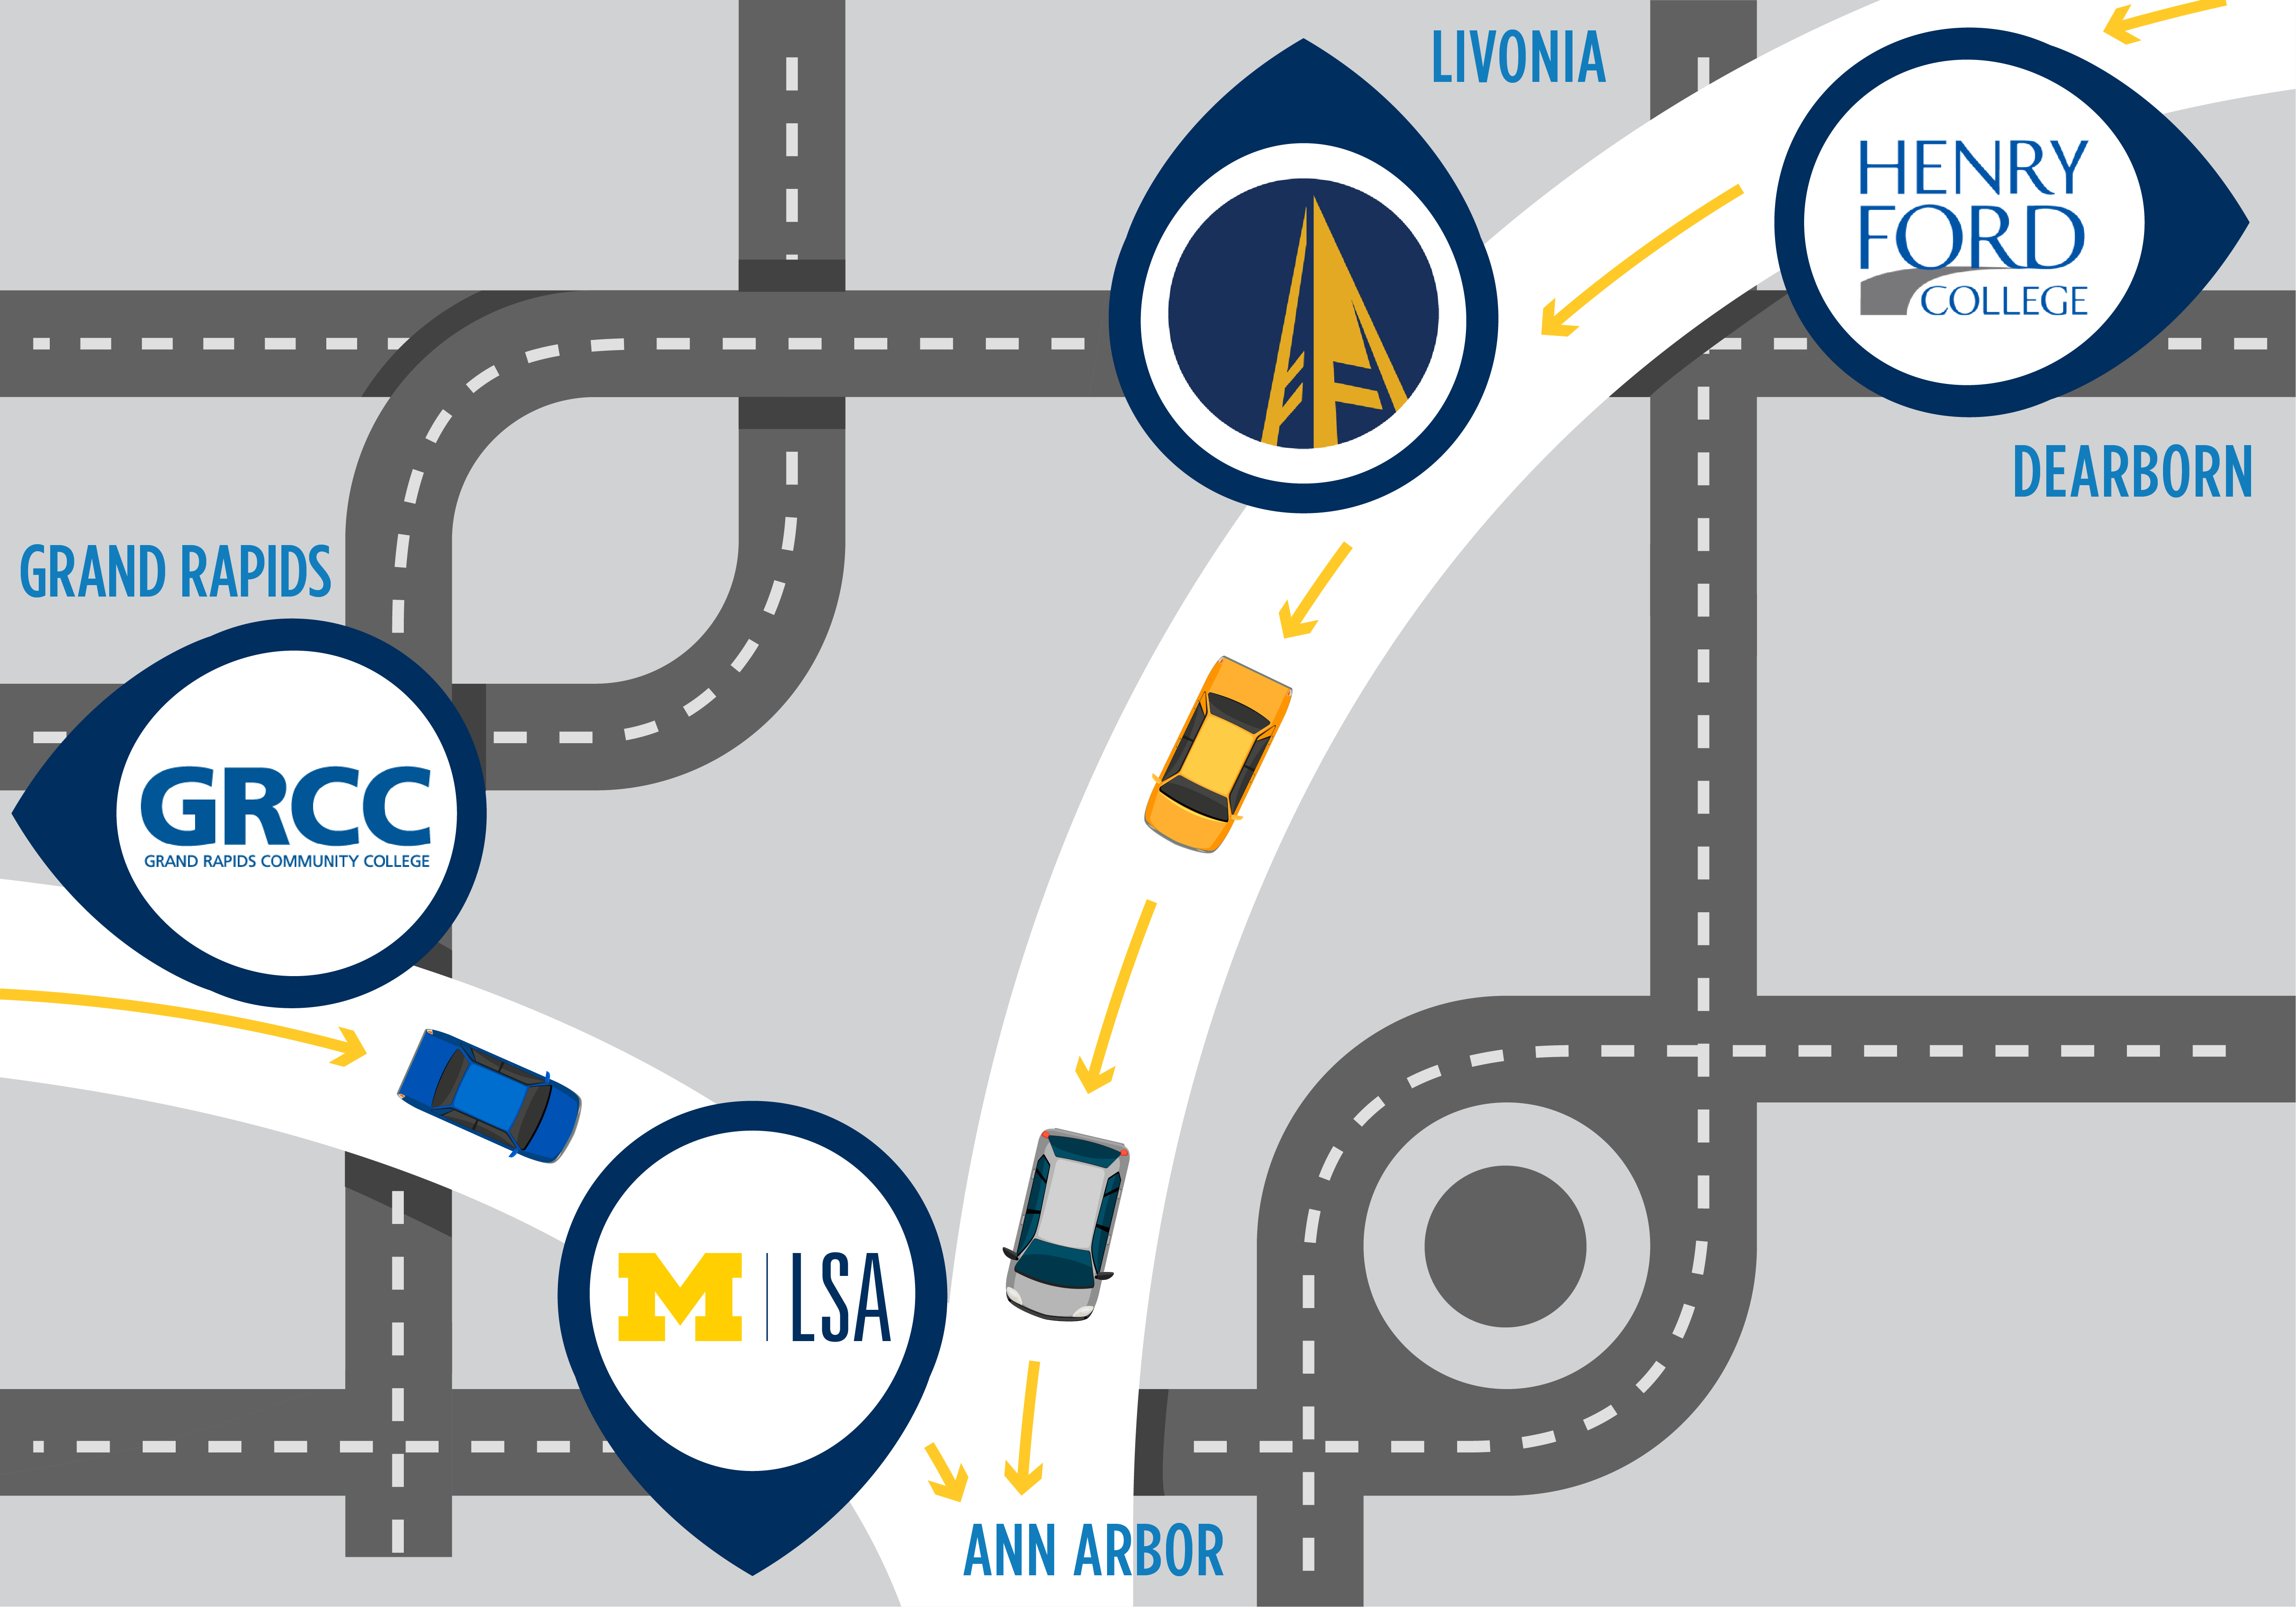 Infographic of roadway, featuring a blue car, gray car and maize car driving to LSA/Ann Arbor, with icons along the way showcasing Grand Rapids Community College, Schoolcraft College and Henry Ford Community College.